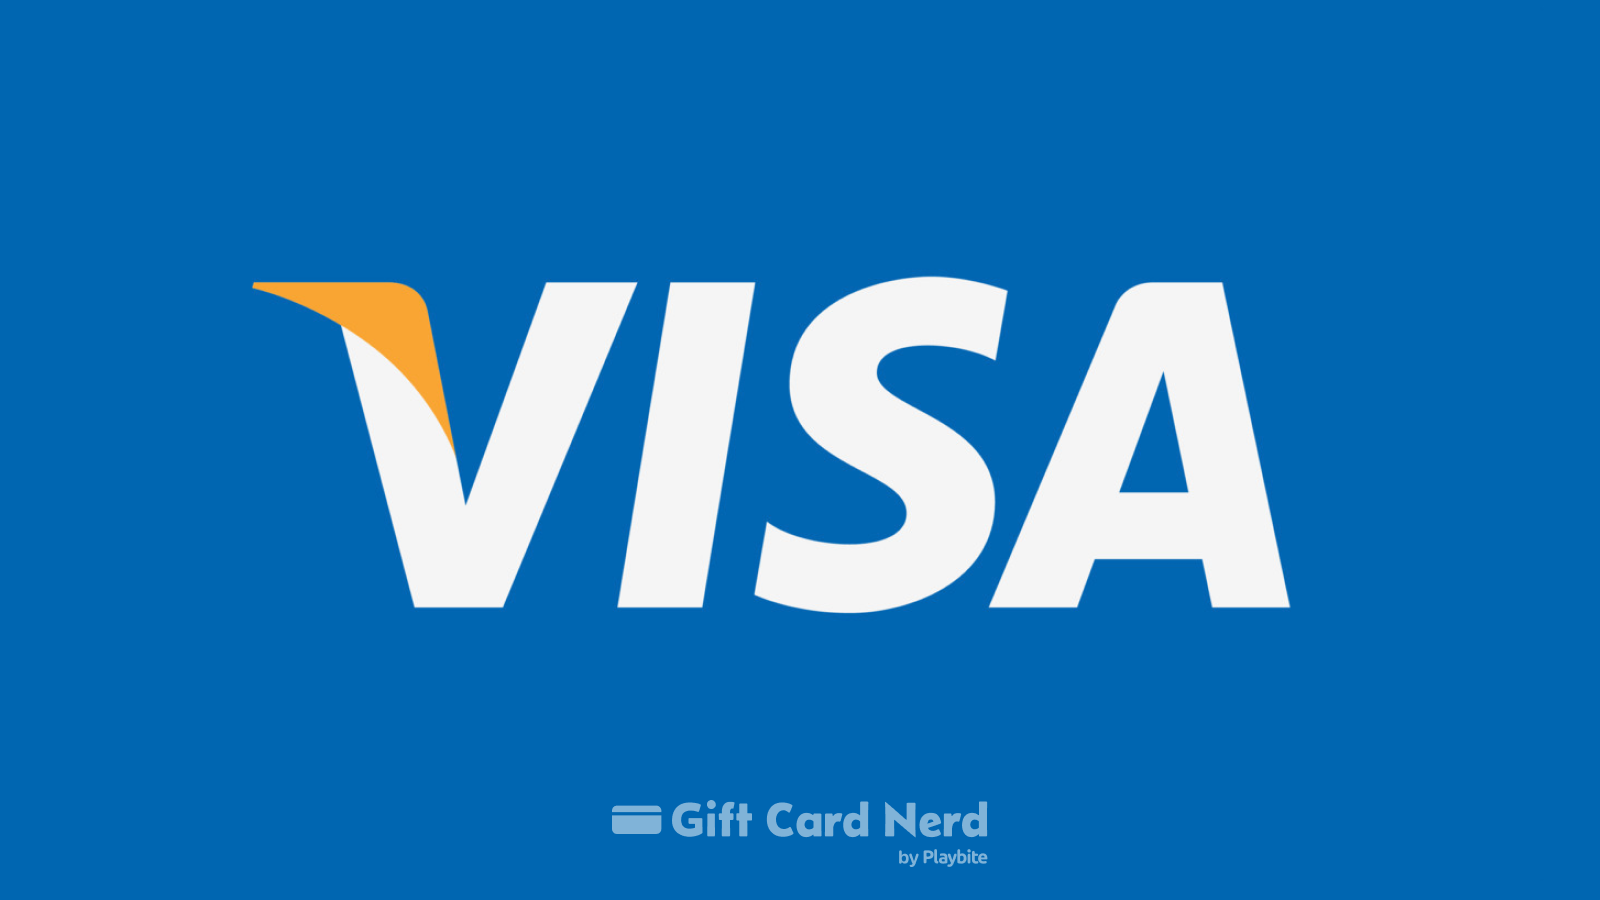 Can I use a Visa gift card on Amazon?